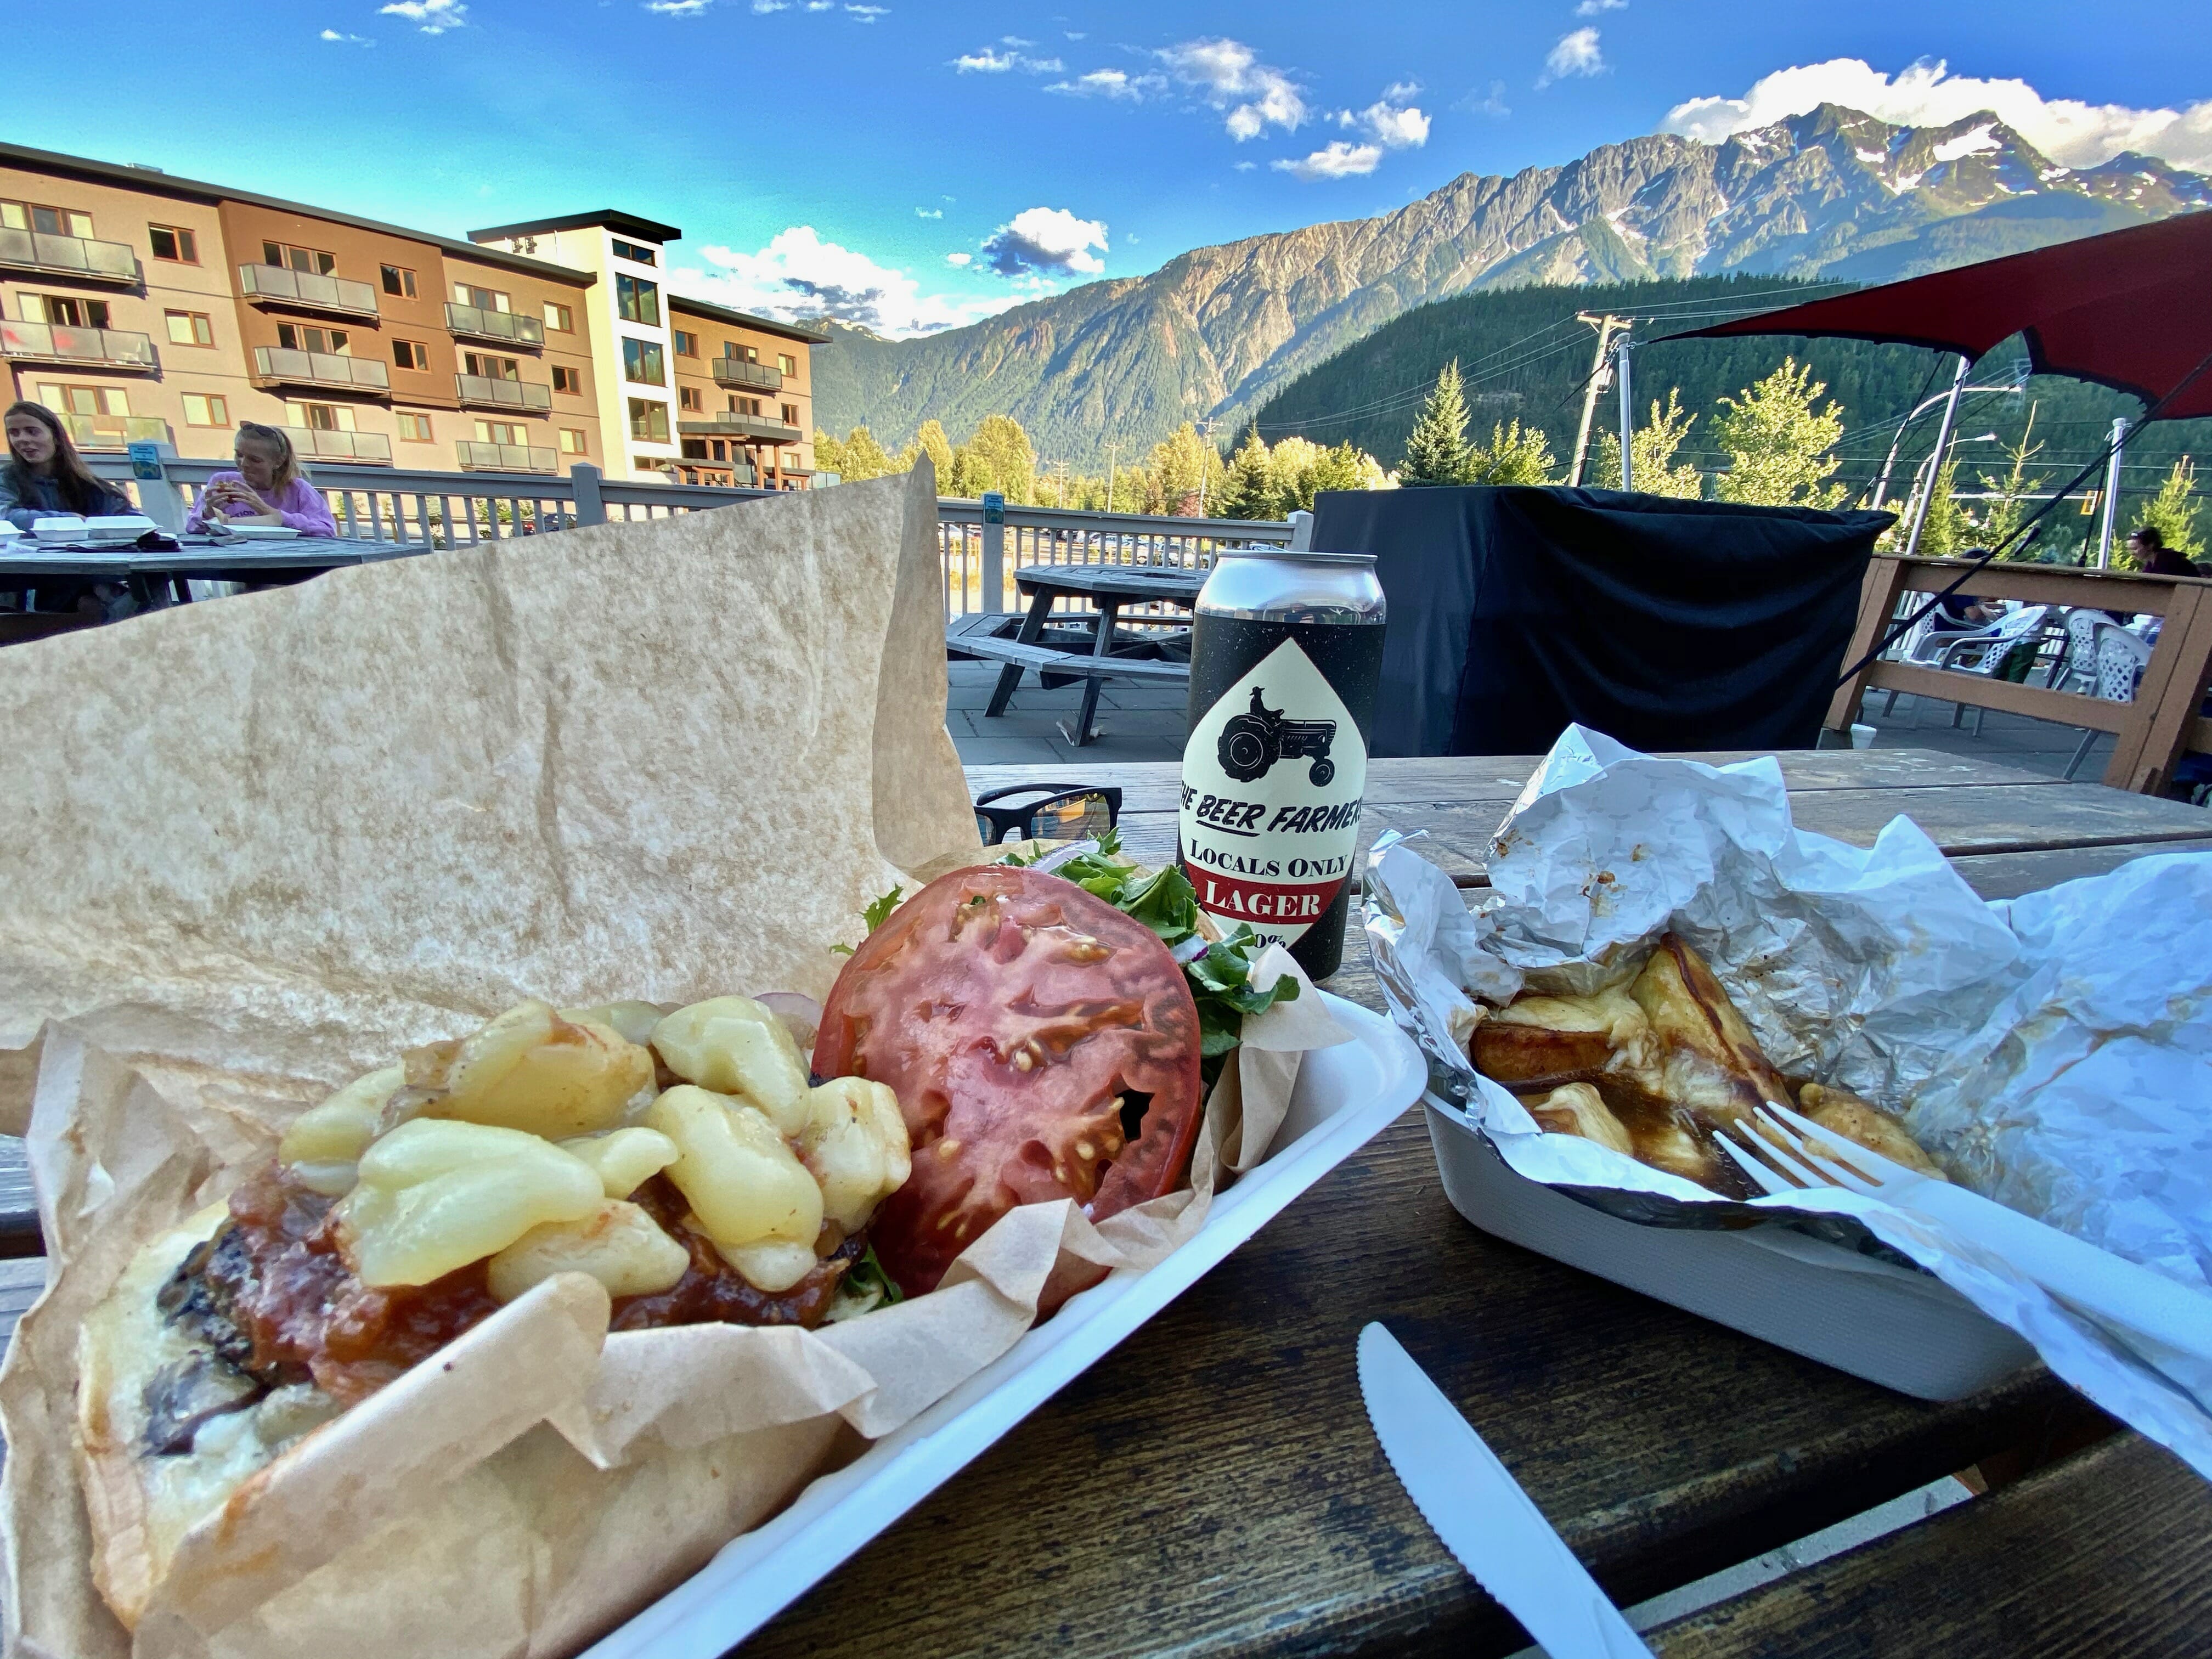 Mile One Eating House in Pemberton, BC